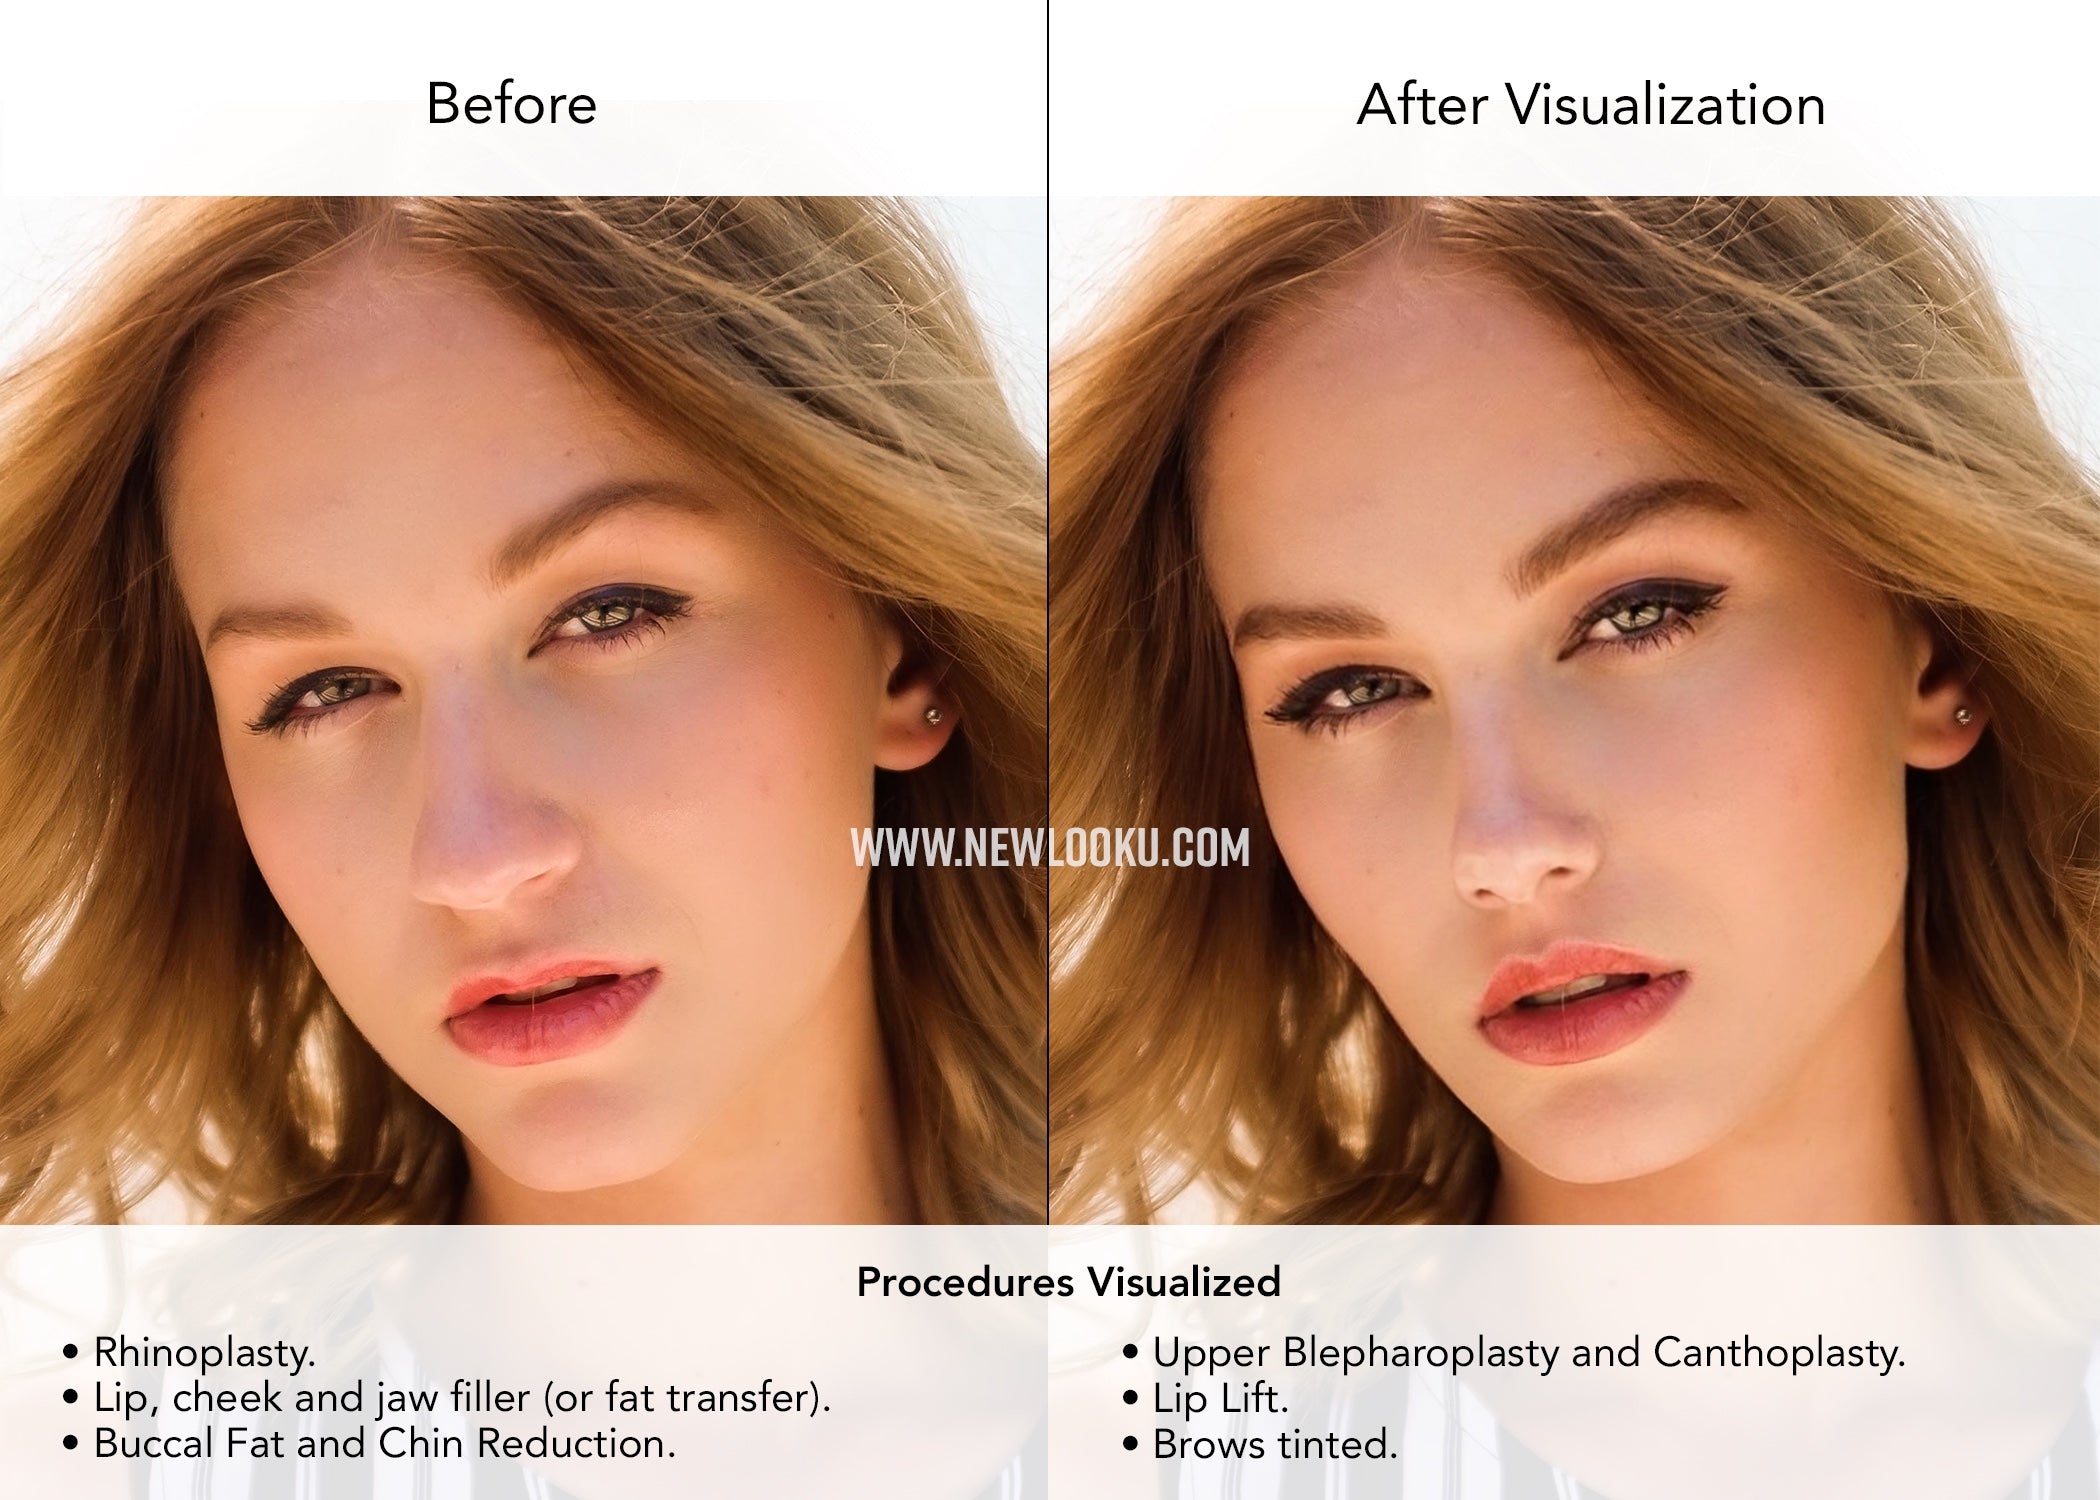 Female Plastic Surgery Visualization Before and After: Rhinoplasty. Lip, Cheek and Jaw Filler (or Fat Transfer). Buccal Fat Reduction. Chin Reduction. Upper Blepharoplasty. Canthoplasty. Lip Lift.